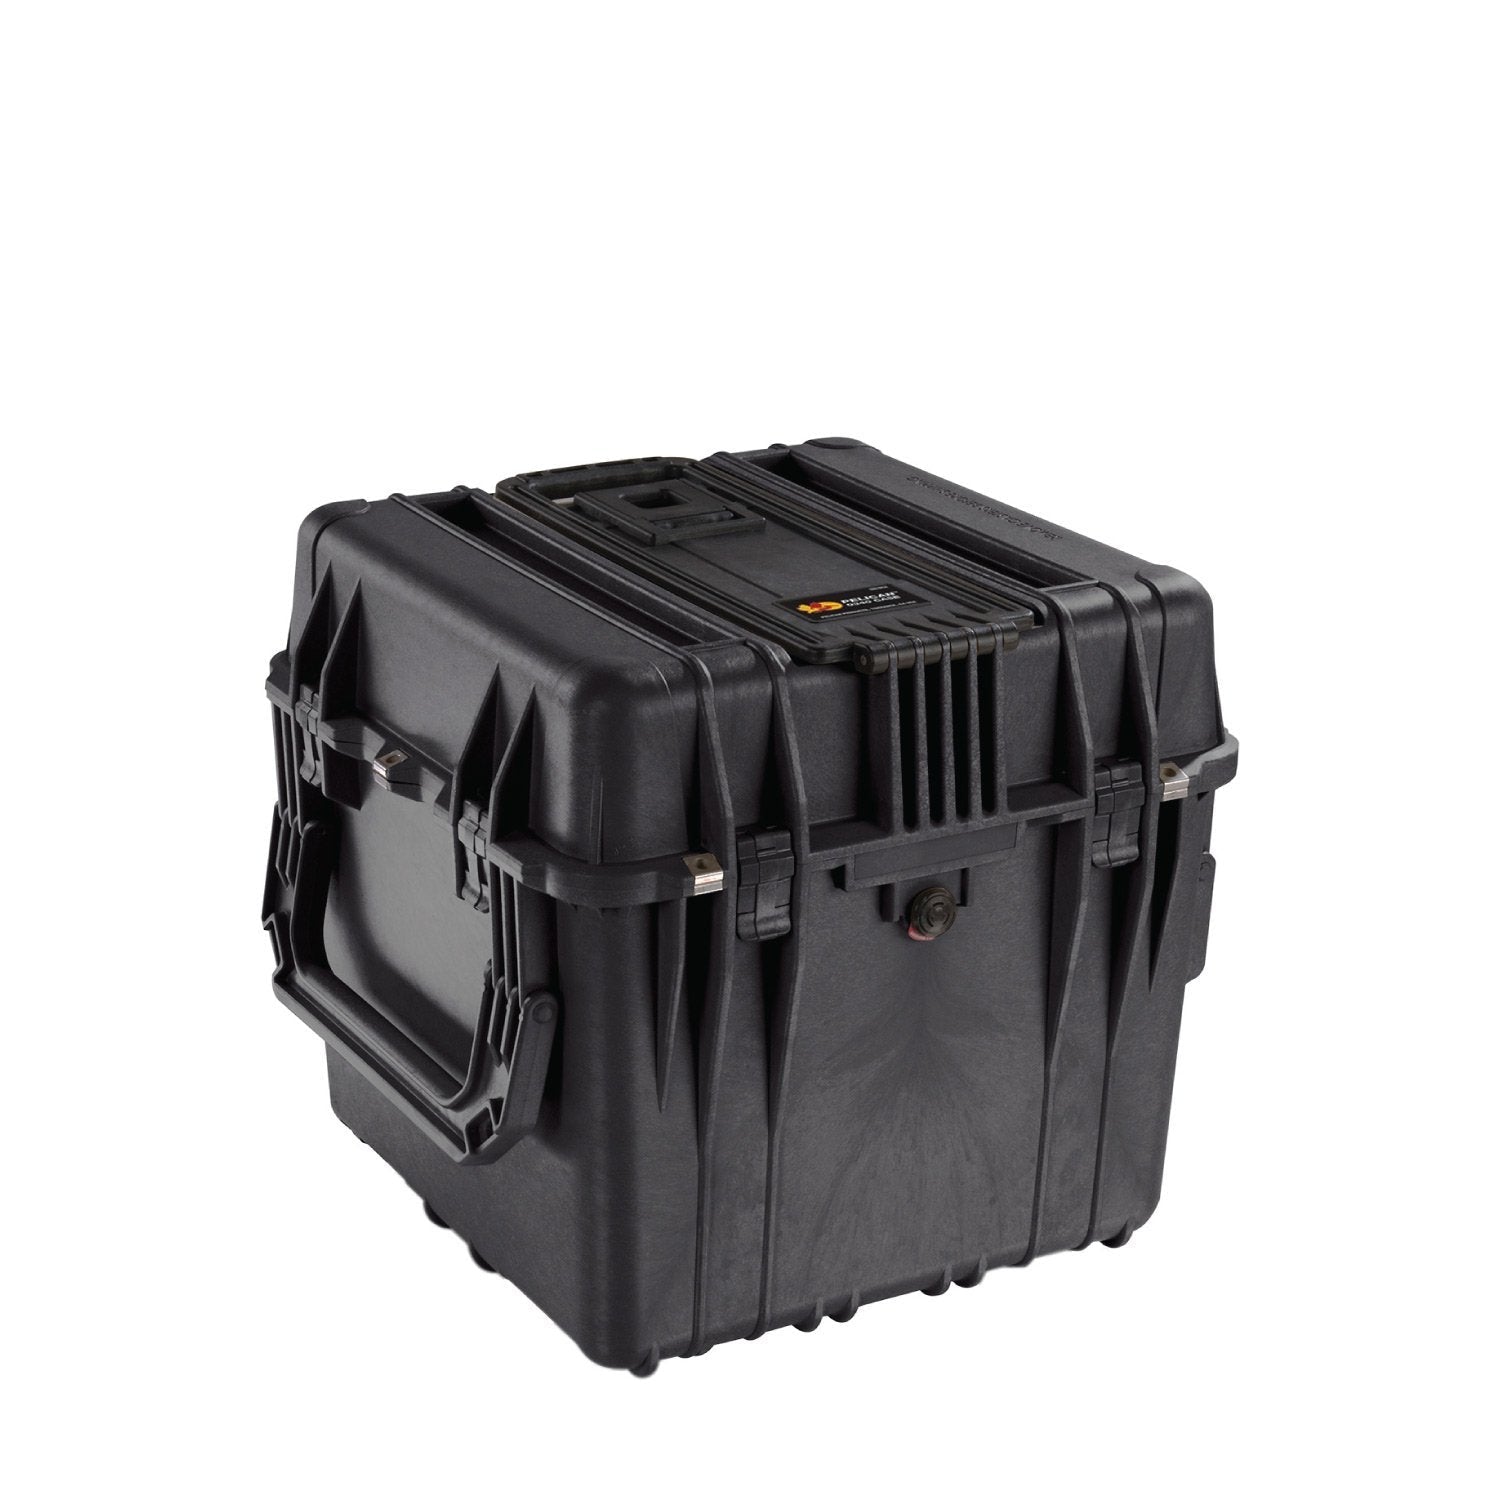 Pelican 0340 Protector Cube Case Black Bags, Packs and Cases Pelican Products With Foam Tactical Gear Supplier Tactical Distributors Australia